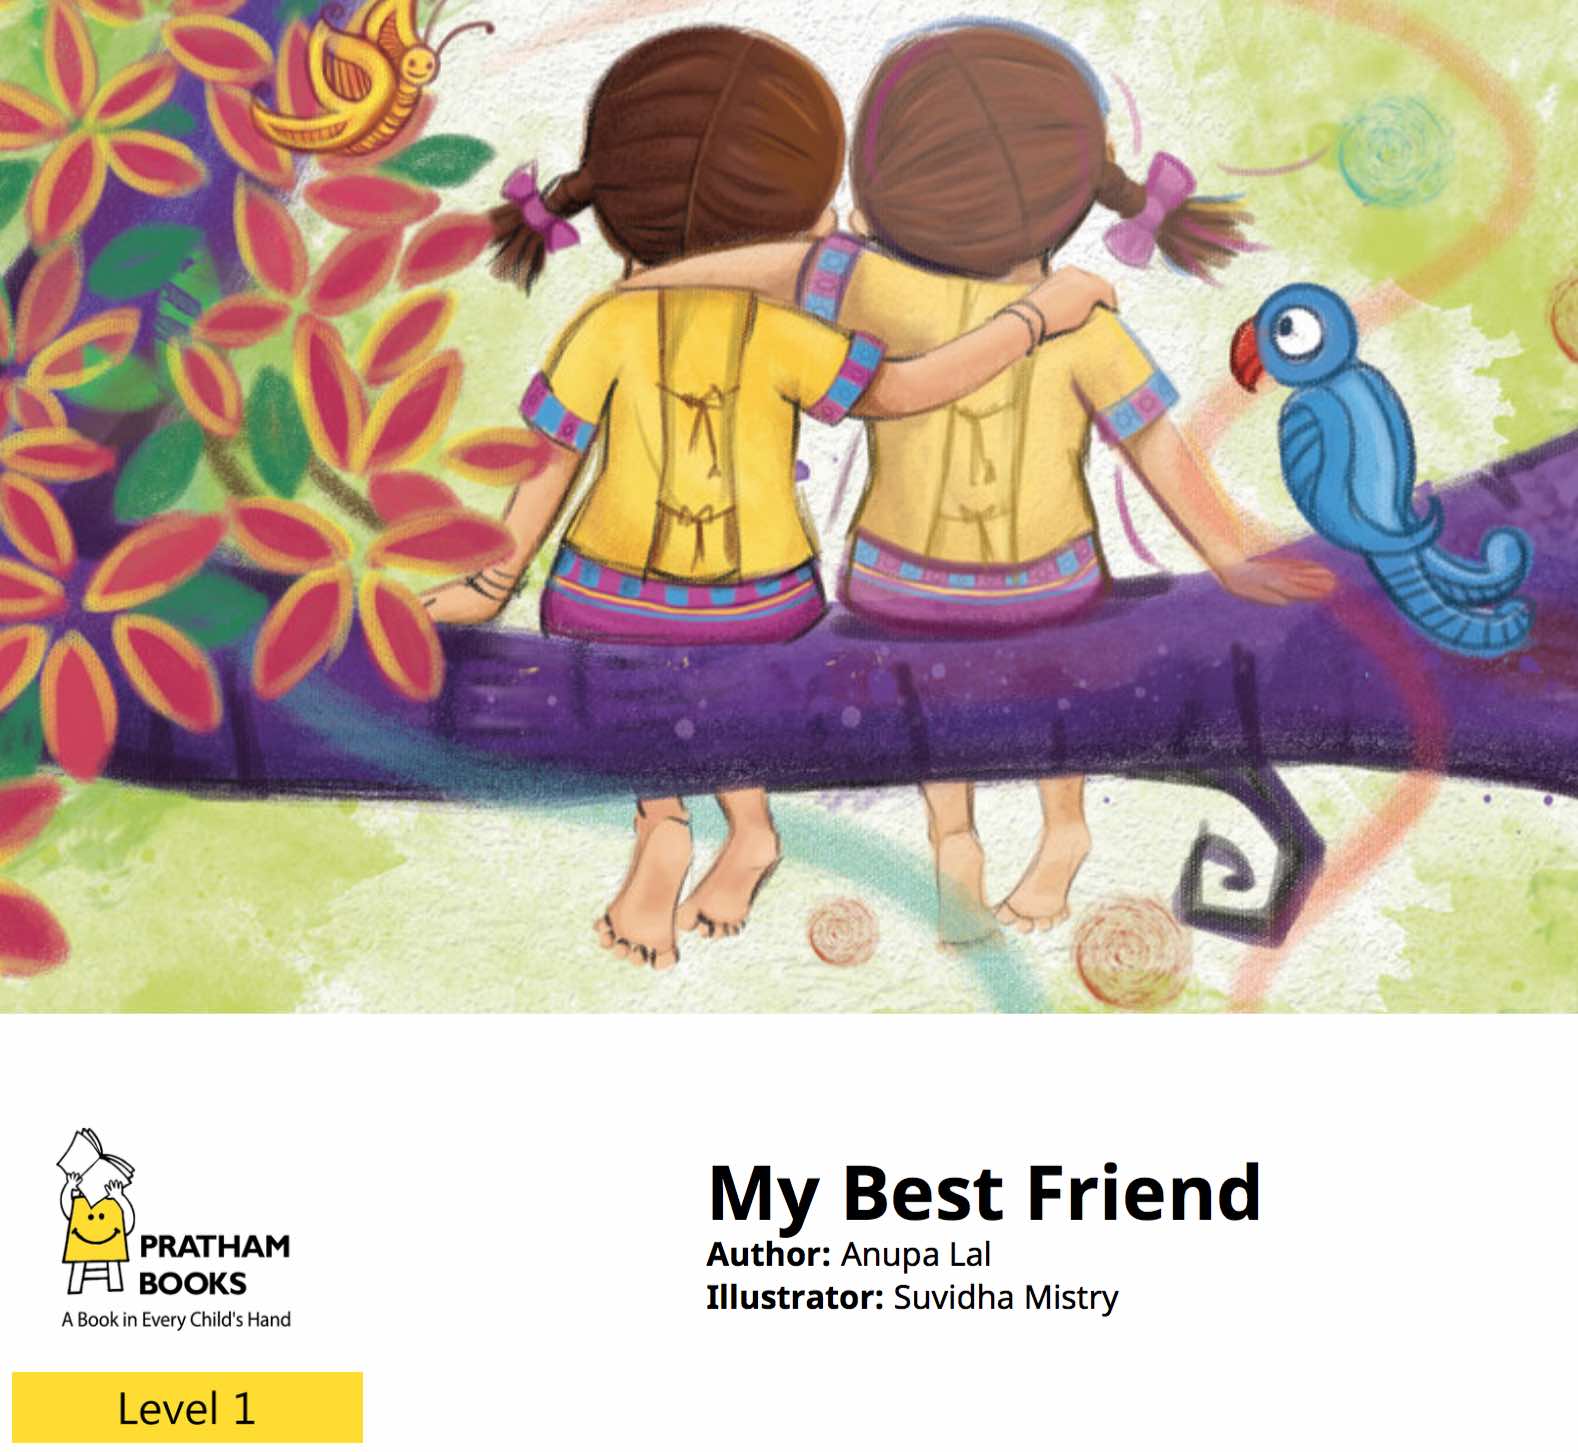 My Best Friend - short story with imagination - Free Kids Books